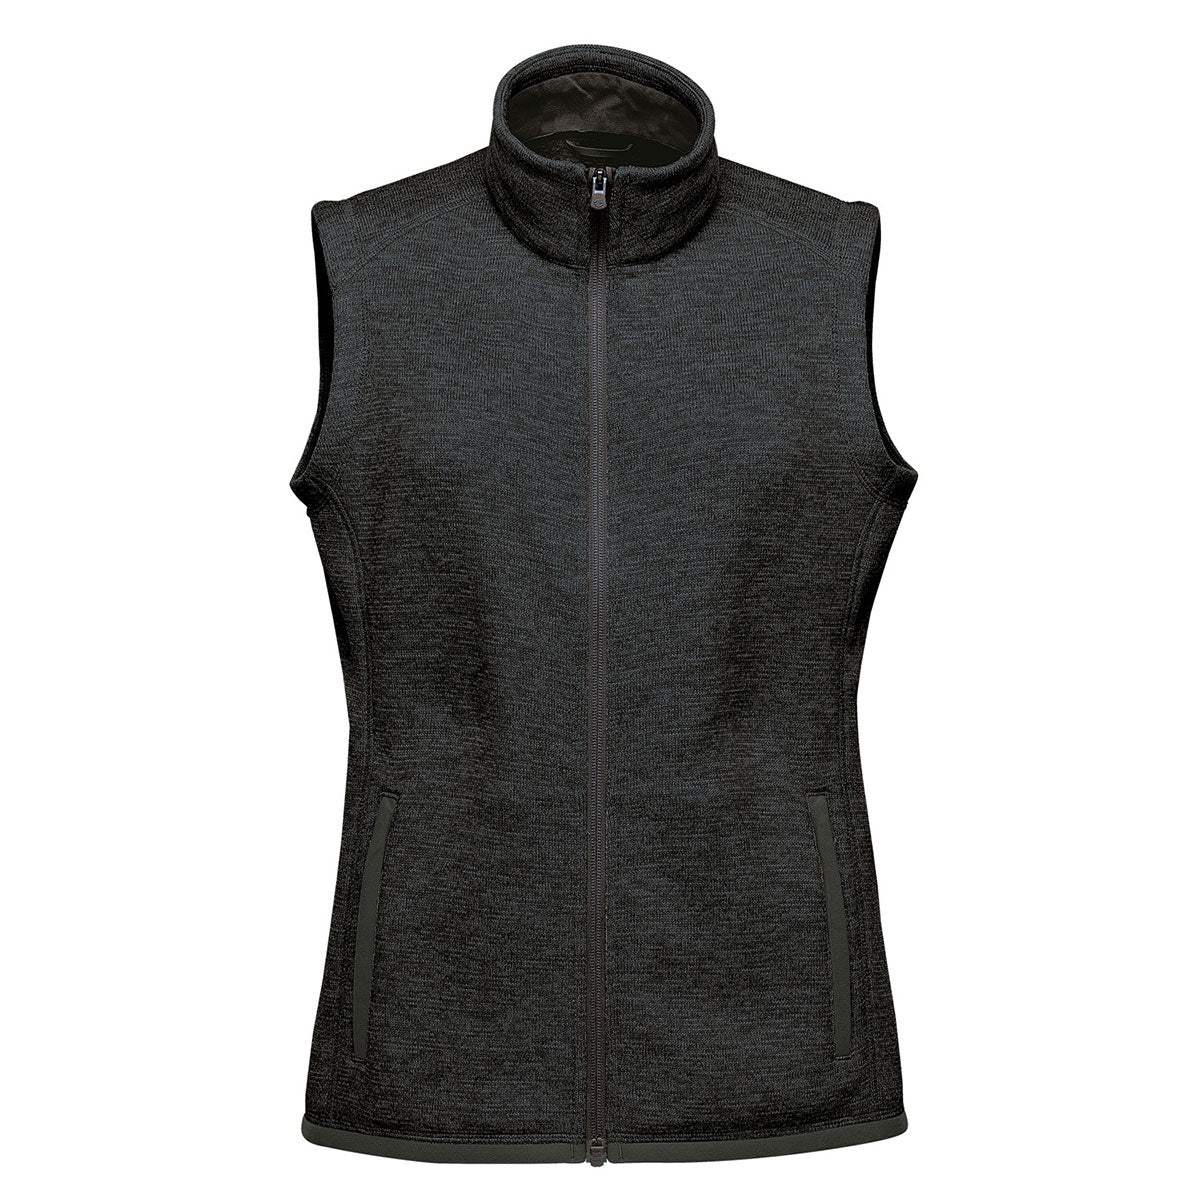 Women’s Avalante Full Zip Fleece Vest by Stormtech - Promotions Only Group Limited